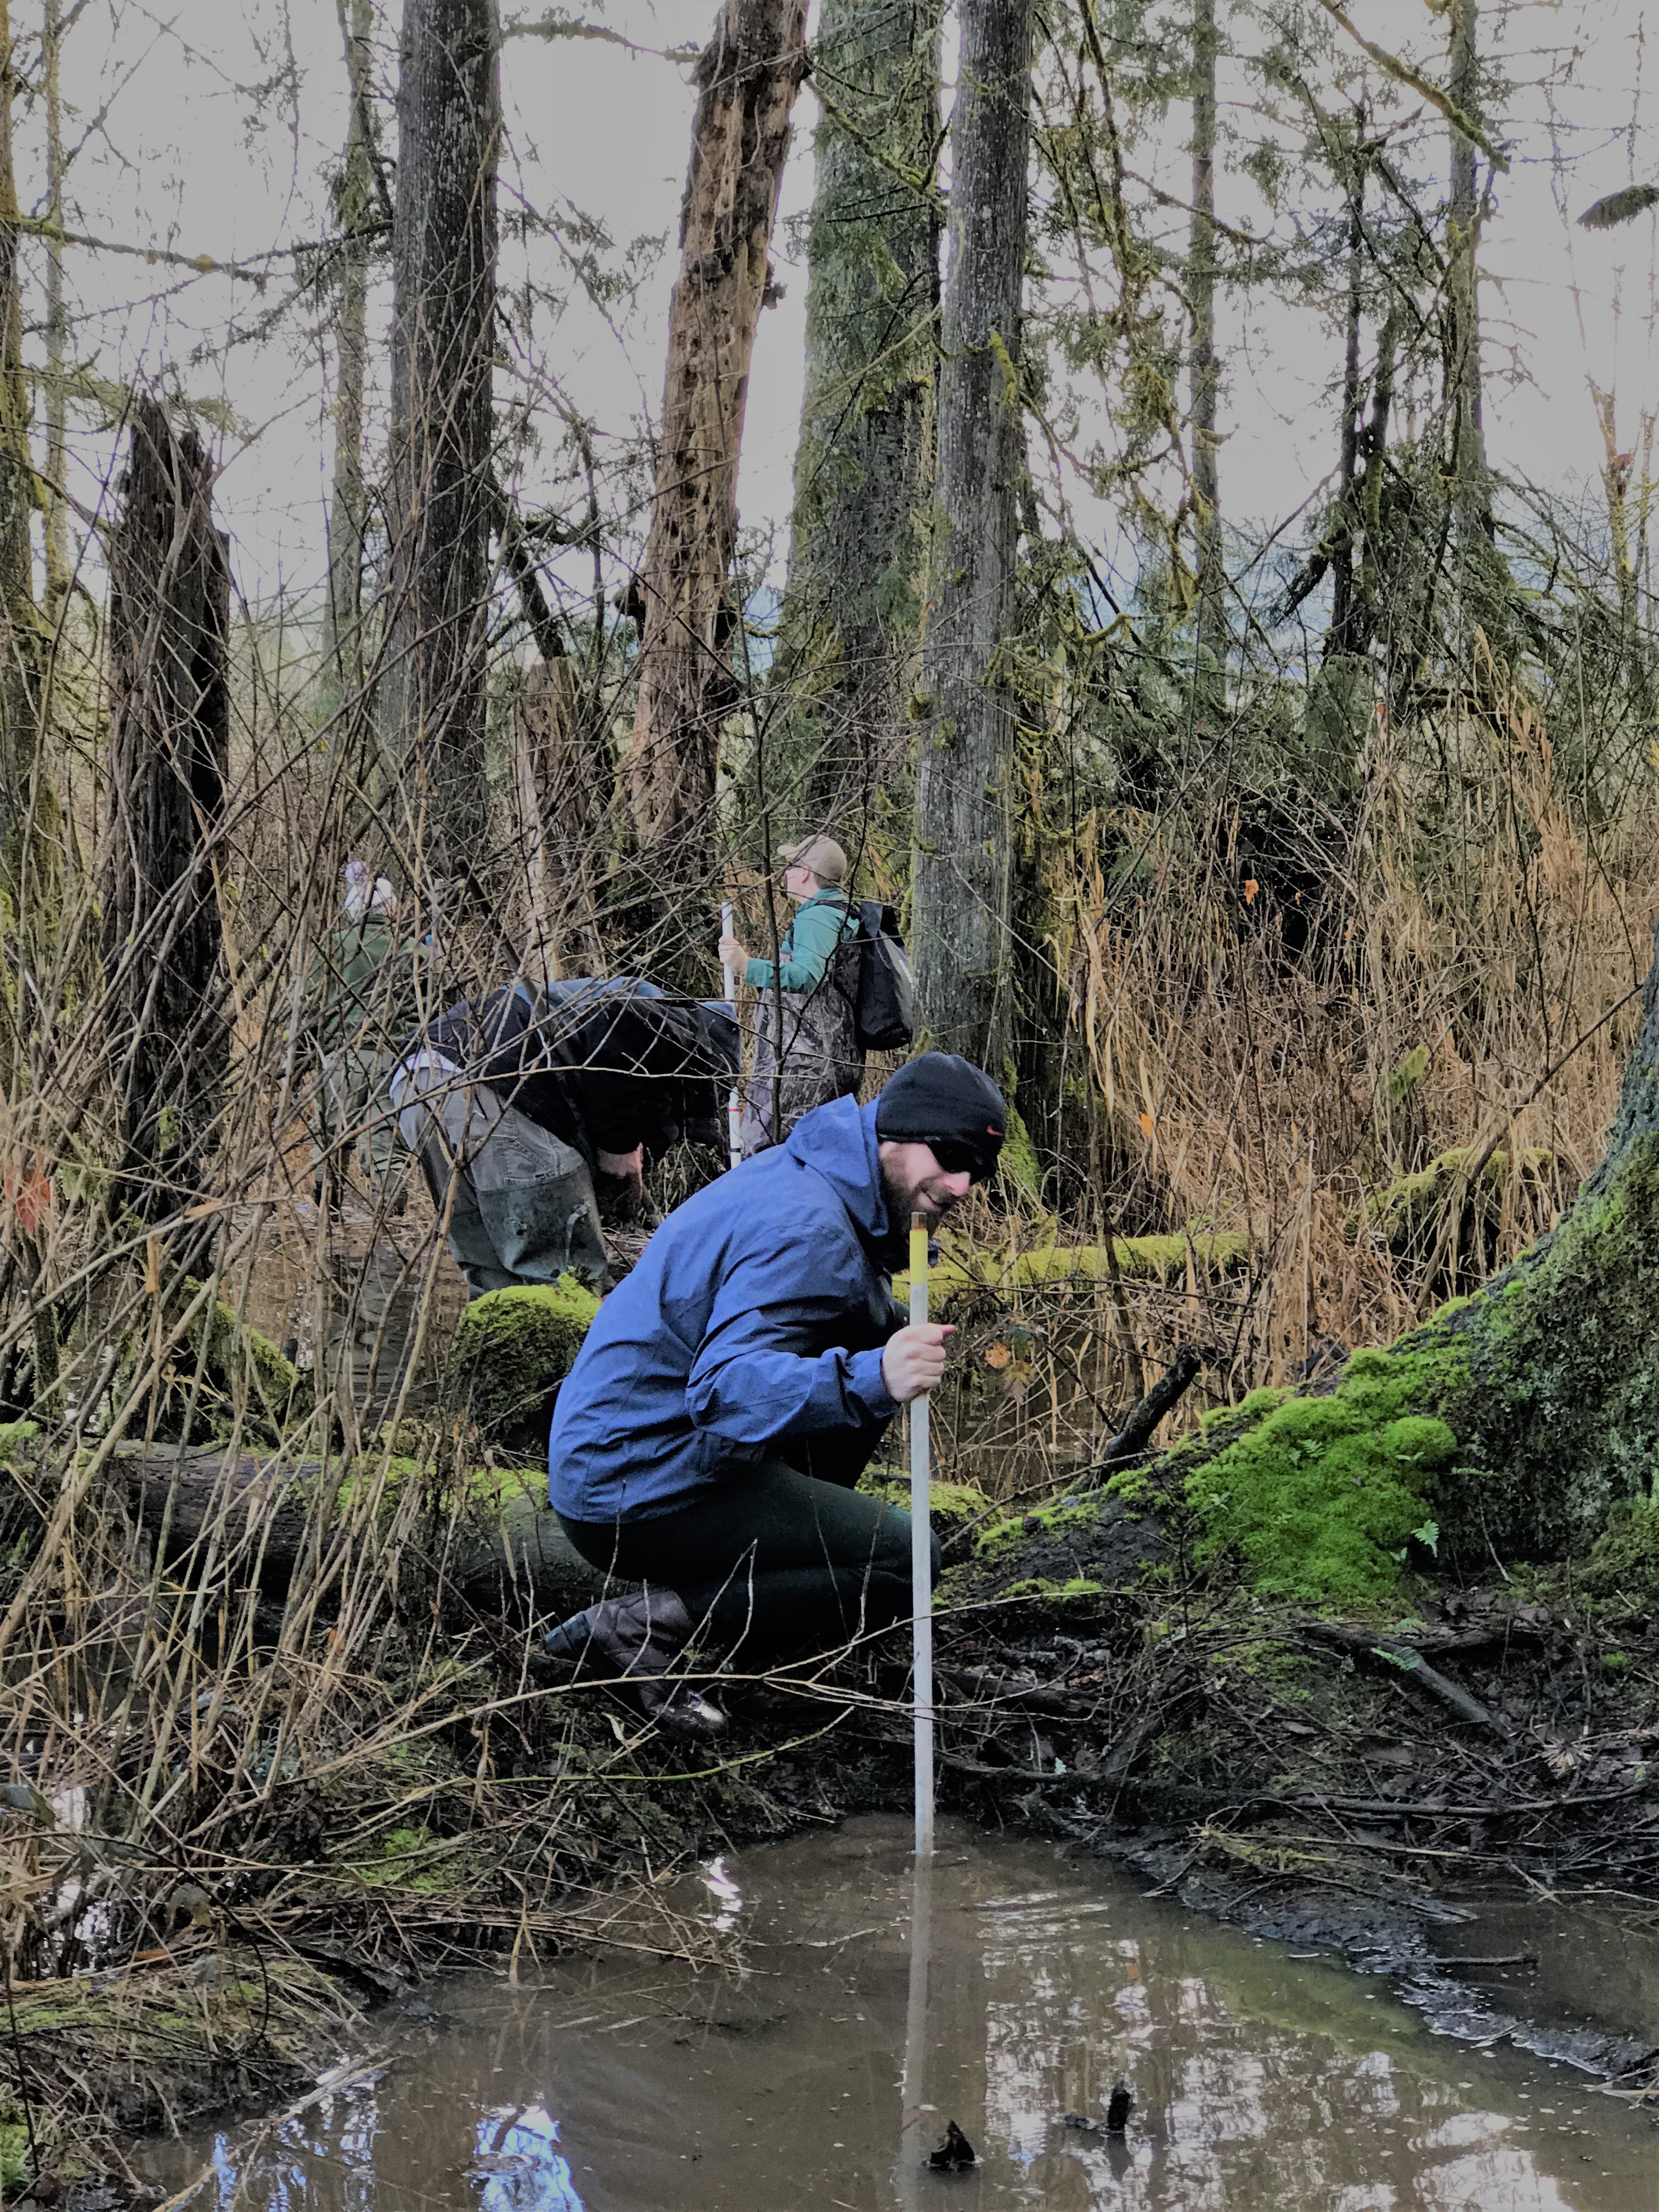 A volunteer measures water quality during amphibian monitoring project at Big Lake Wetlands Conservation Area, March 2018. Photograph credit: Skagit Land Trust staff.